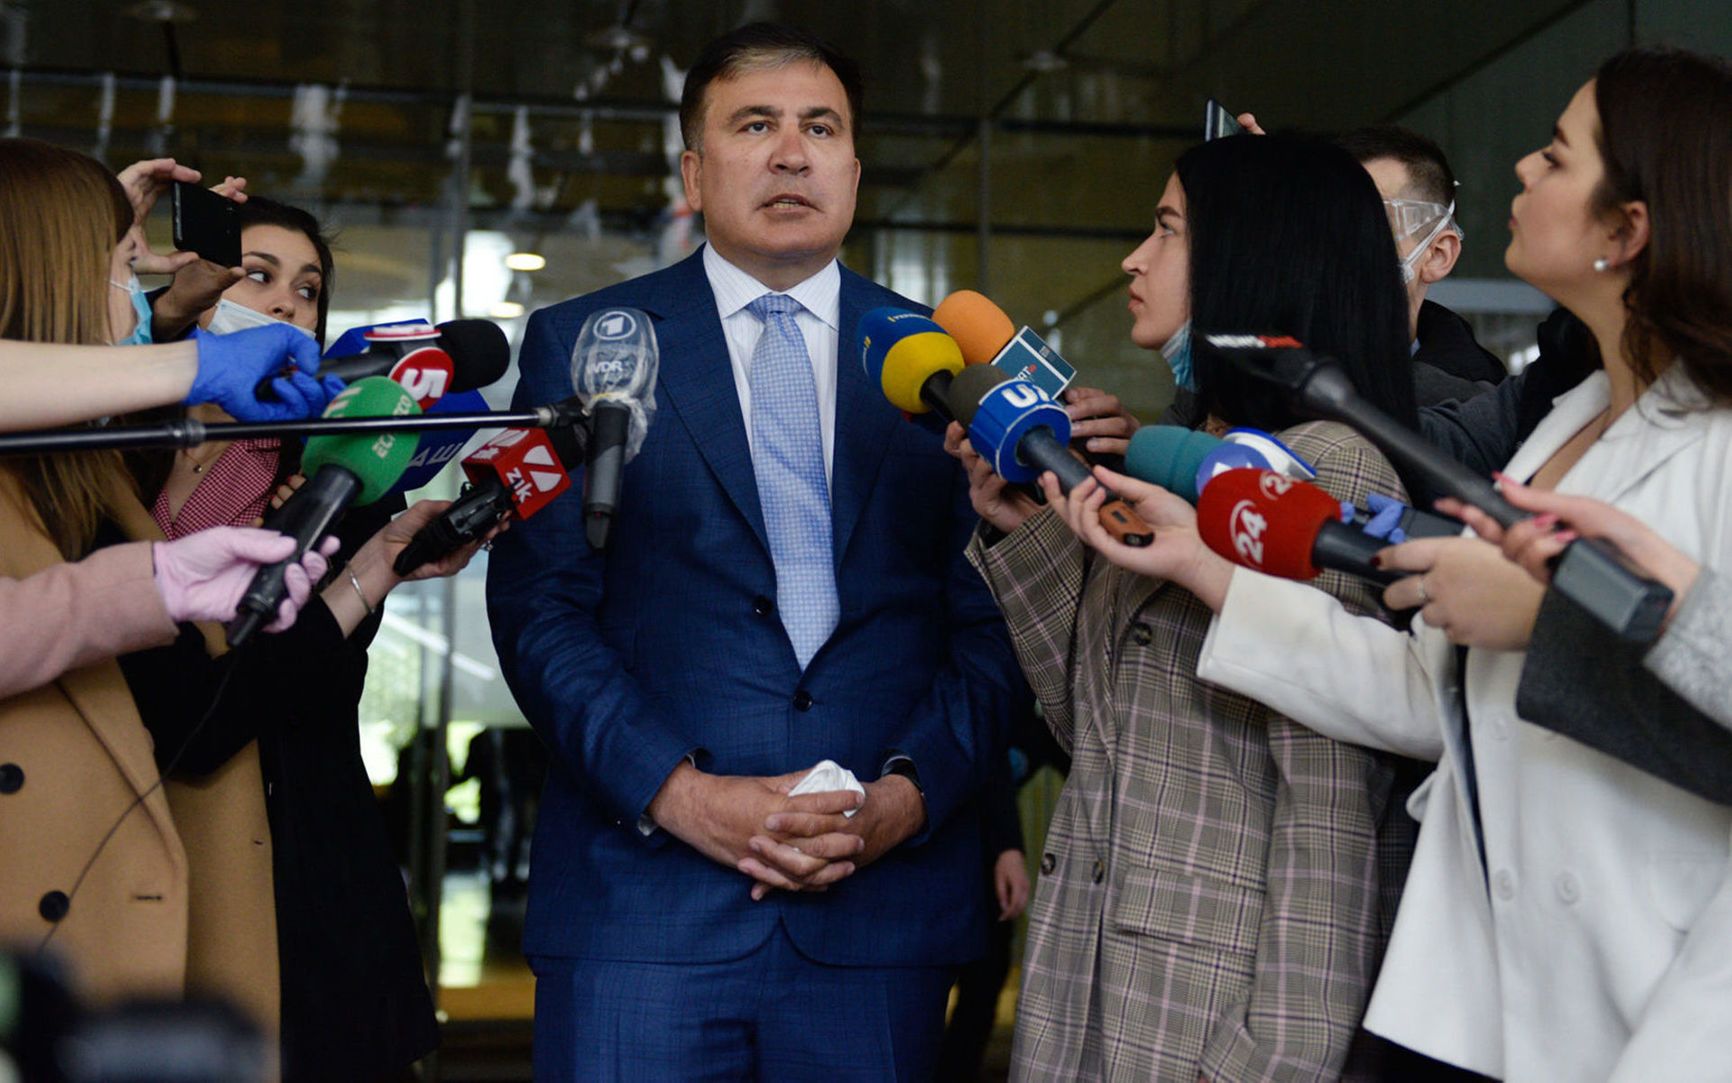 Mikheil Saakashvili addresses journalists after a meeting with members of Ukraine's Servant of the People parliament fraction in Kyiv, Ukraine, on April 24, 2020